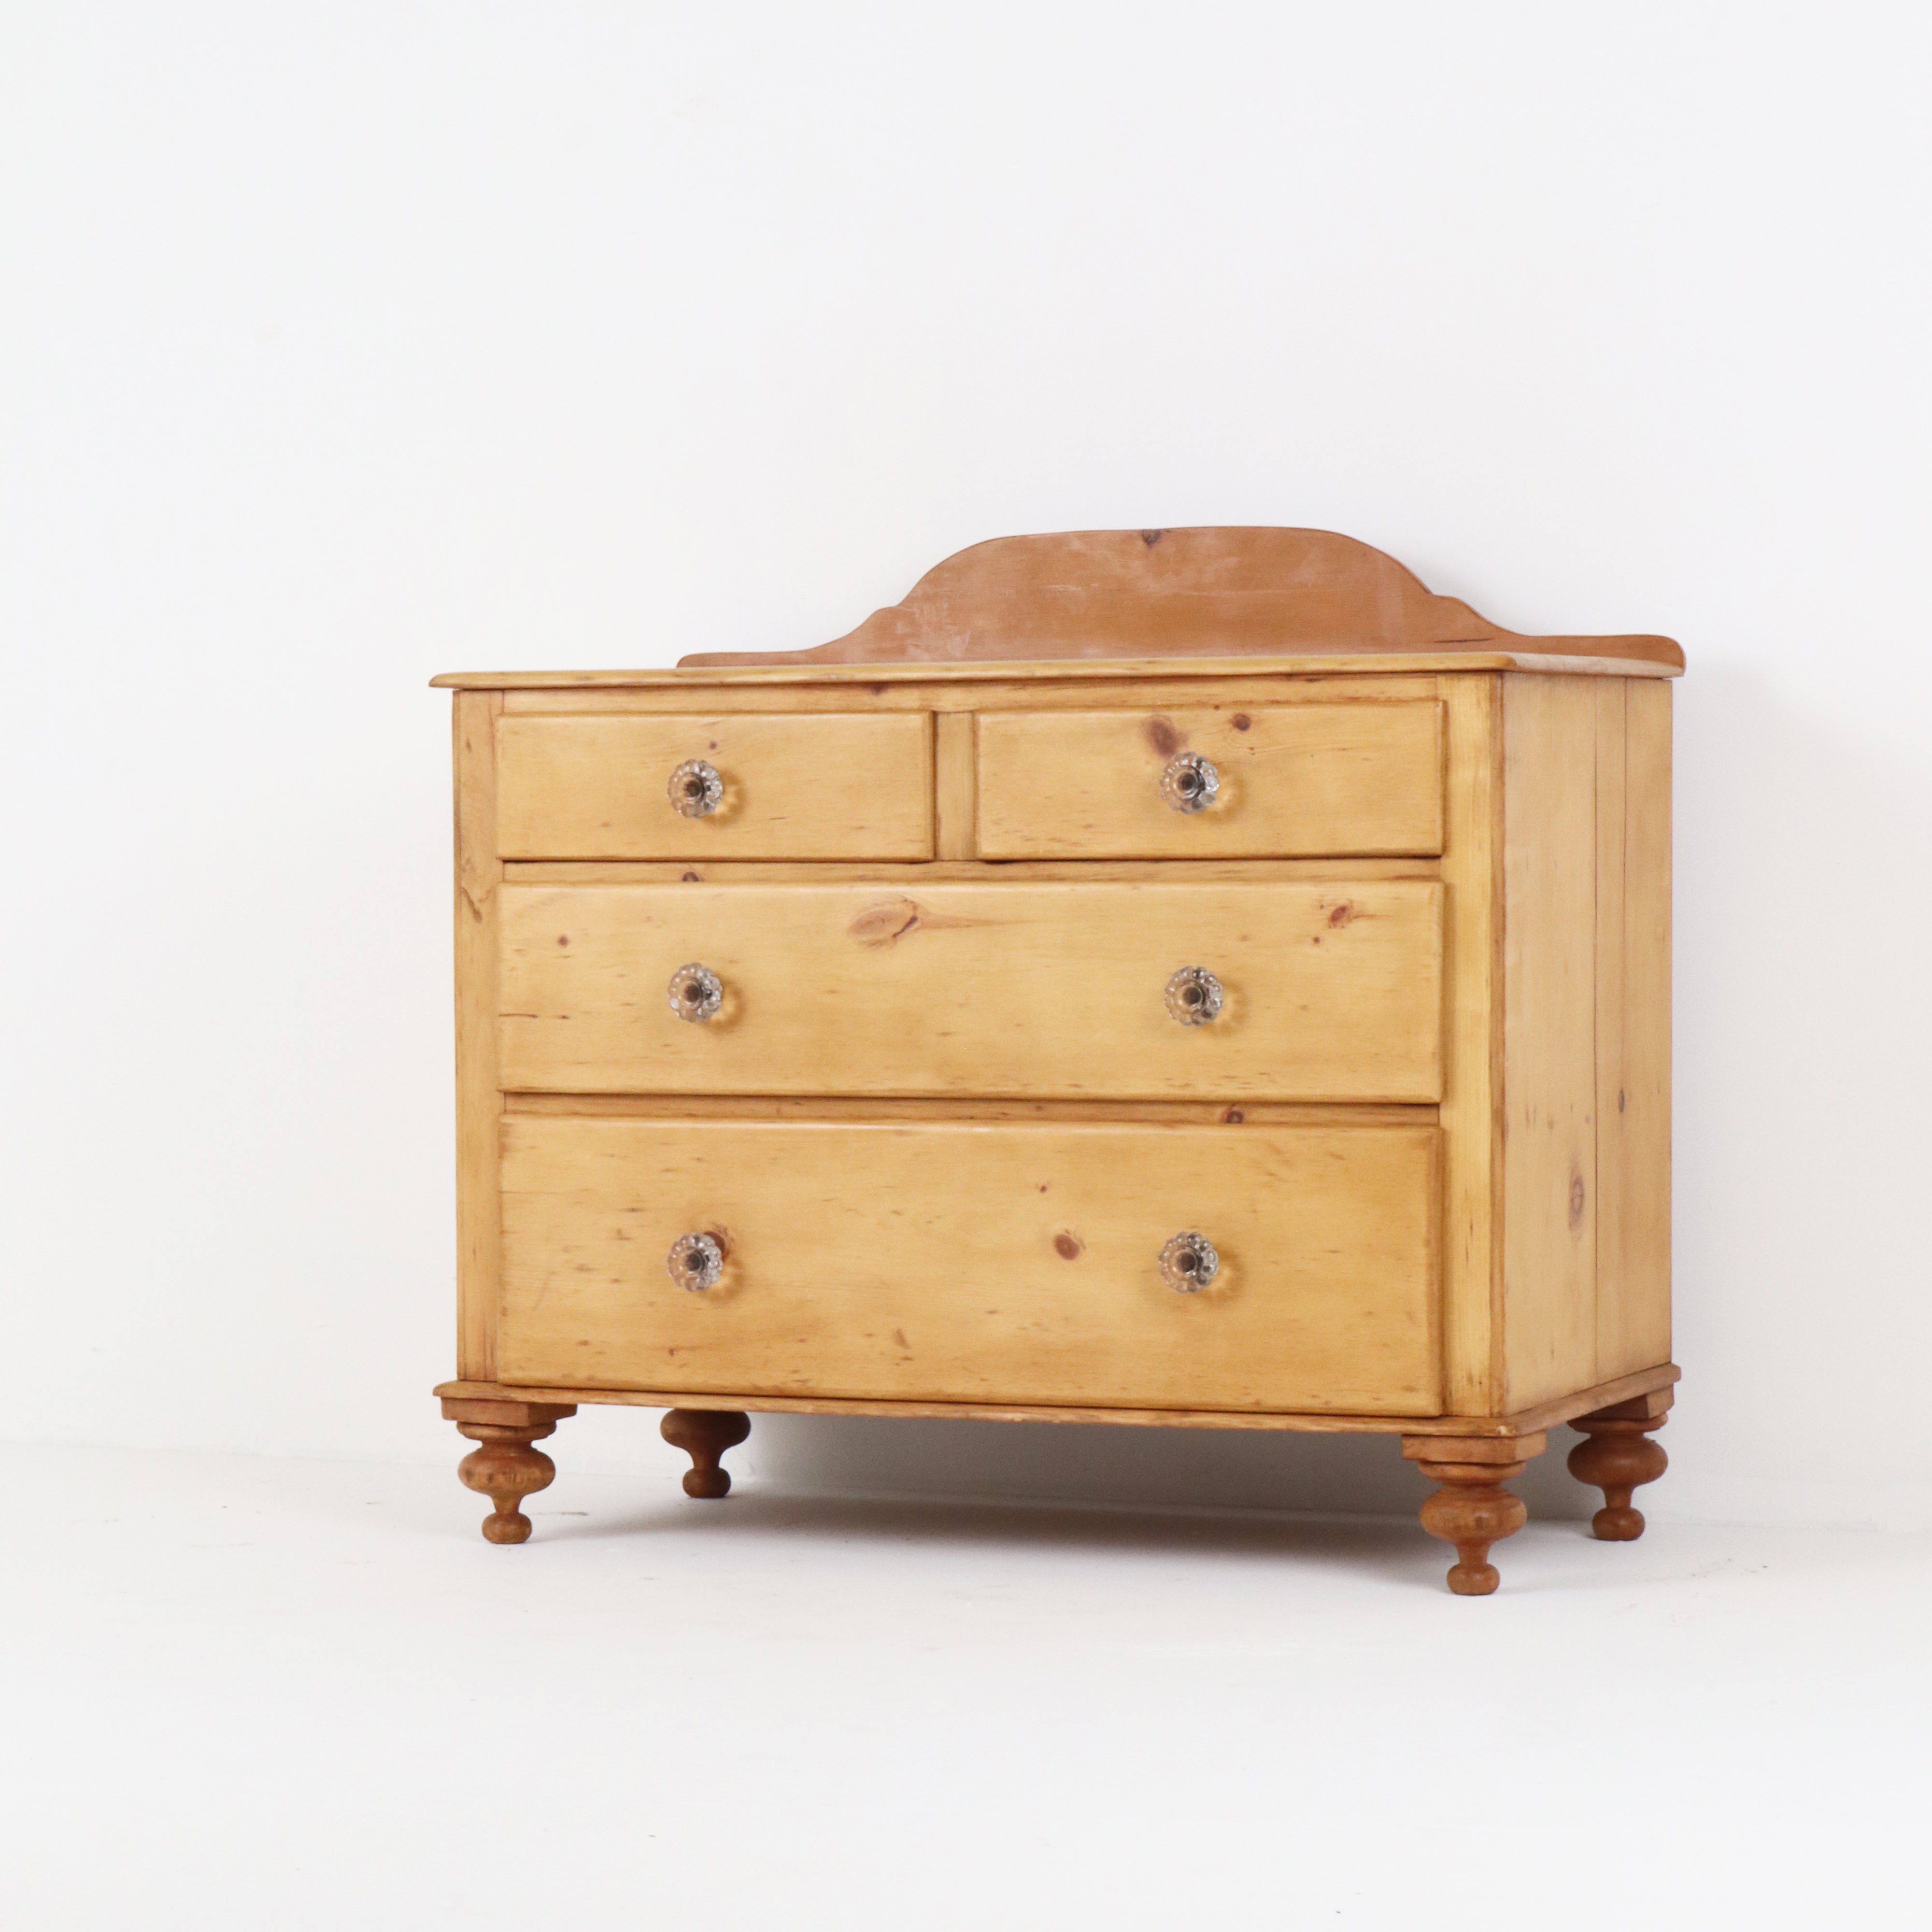 Antique English Pine Chest of Drawers c1880